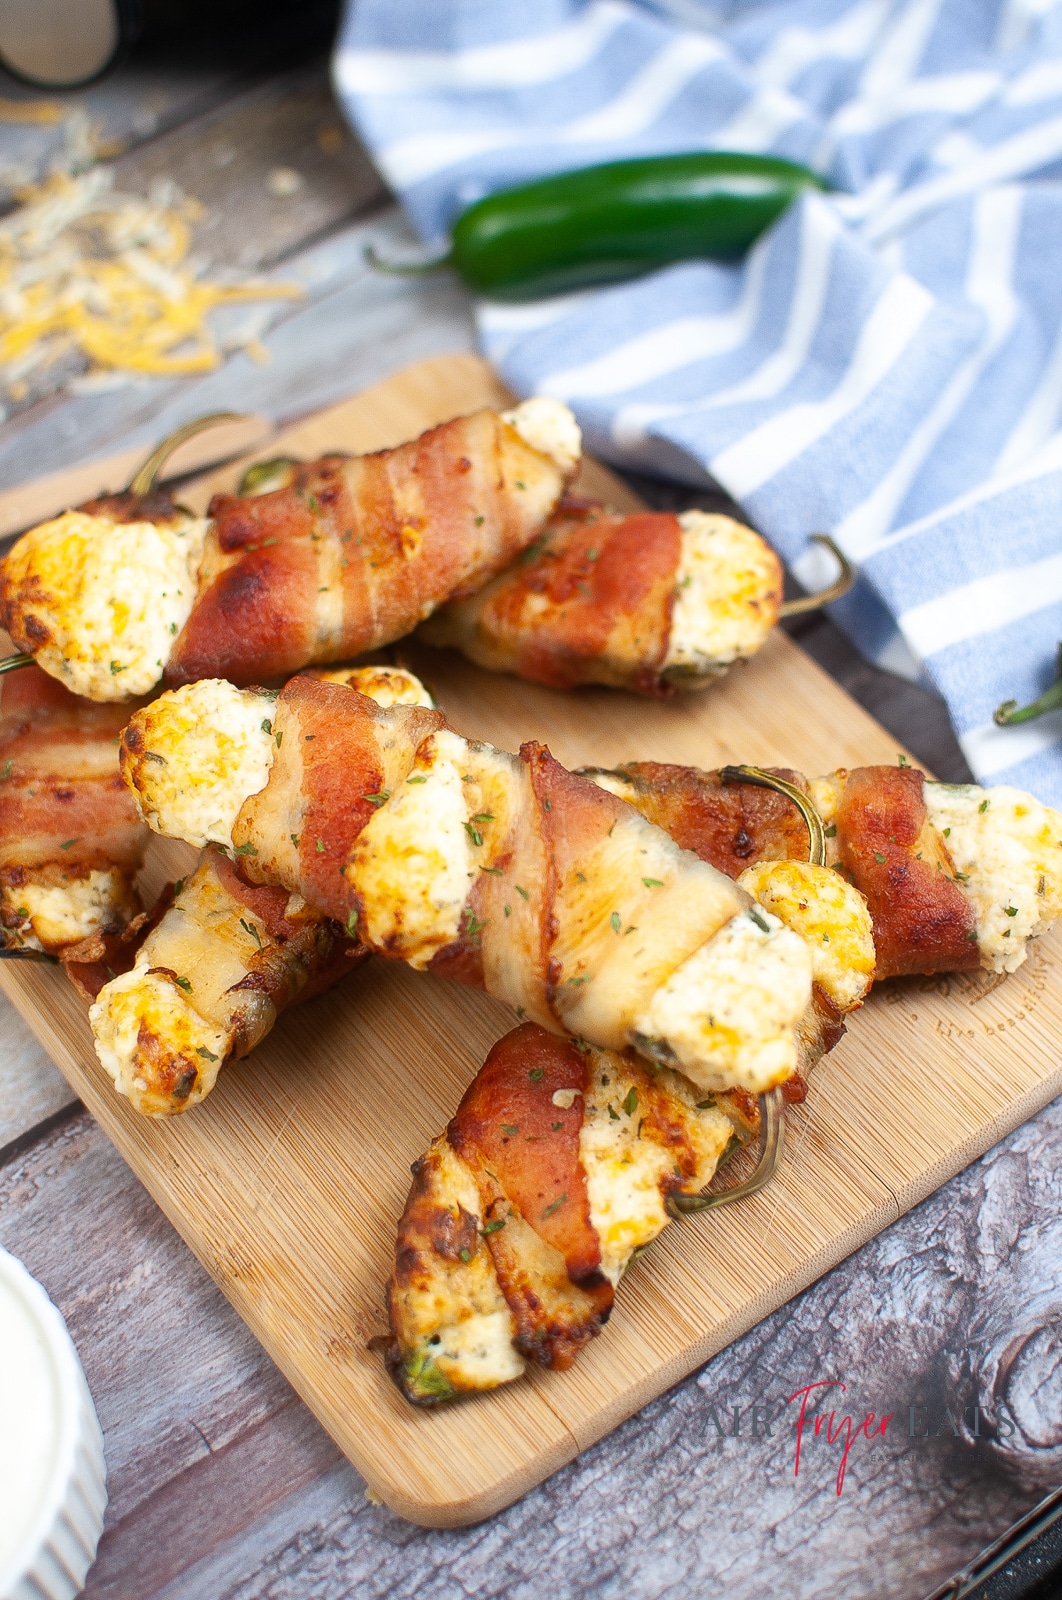 vertical photo of 7 bacon wrapped jalapeno poppers on a board, which is on a wooden table with a striped cloth, a jalapeno pepper and some grated cheese are also on the table